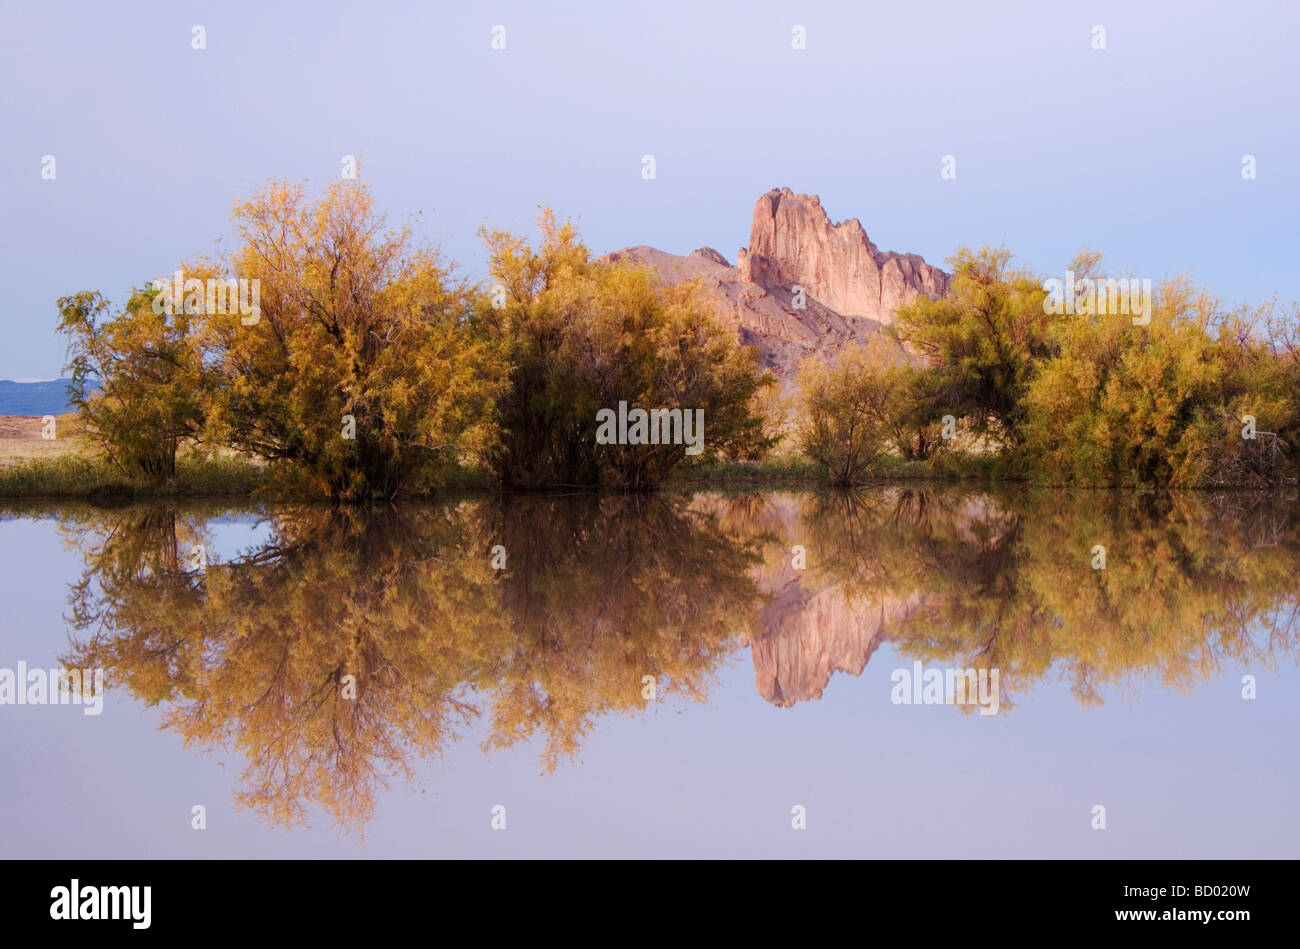 Rocks reflecting in pond with Salt Cedars at sunrise Shiprock Navajo Indian Reserve New Mexico USA September 2006 Stock Photo